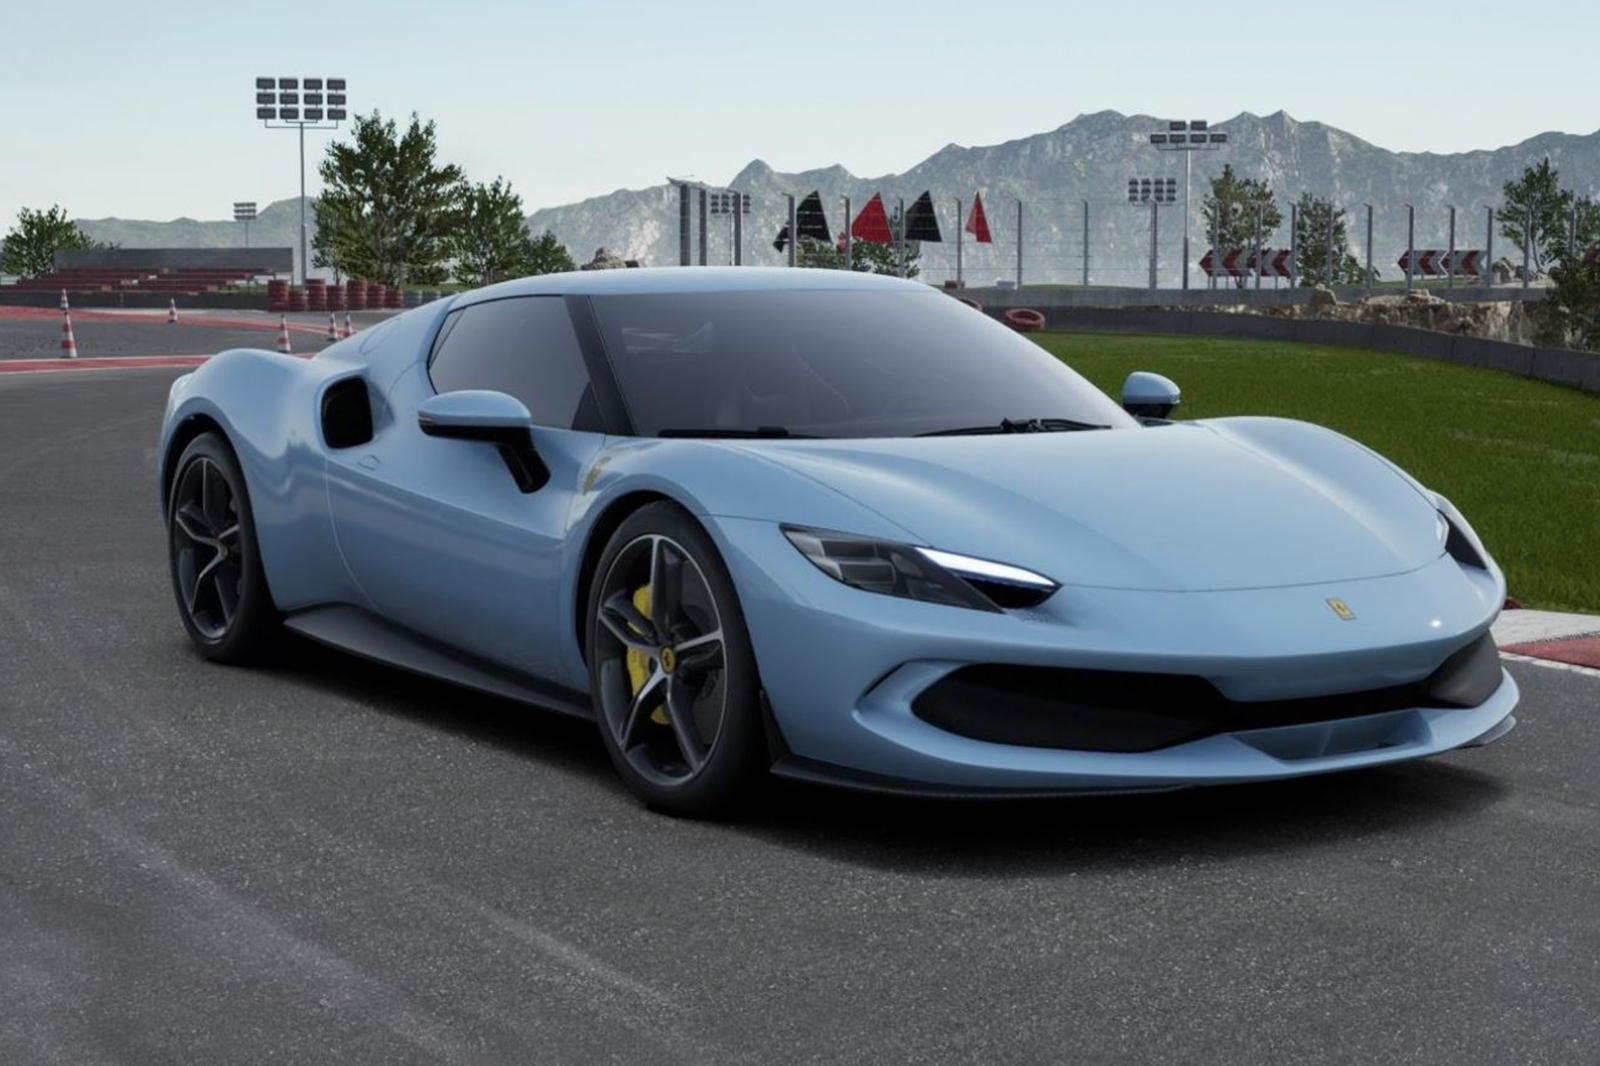 waste-time-playing-with-ferrari-s-new-296-gtb-configurator-carbuzz